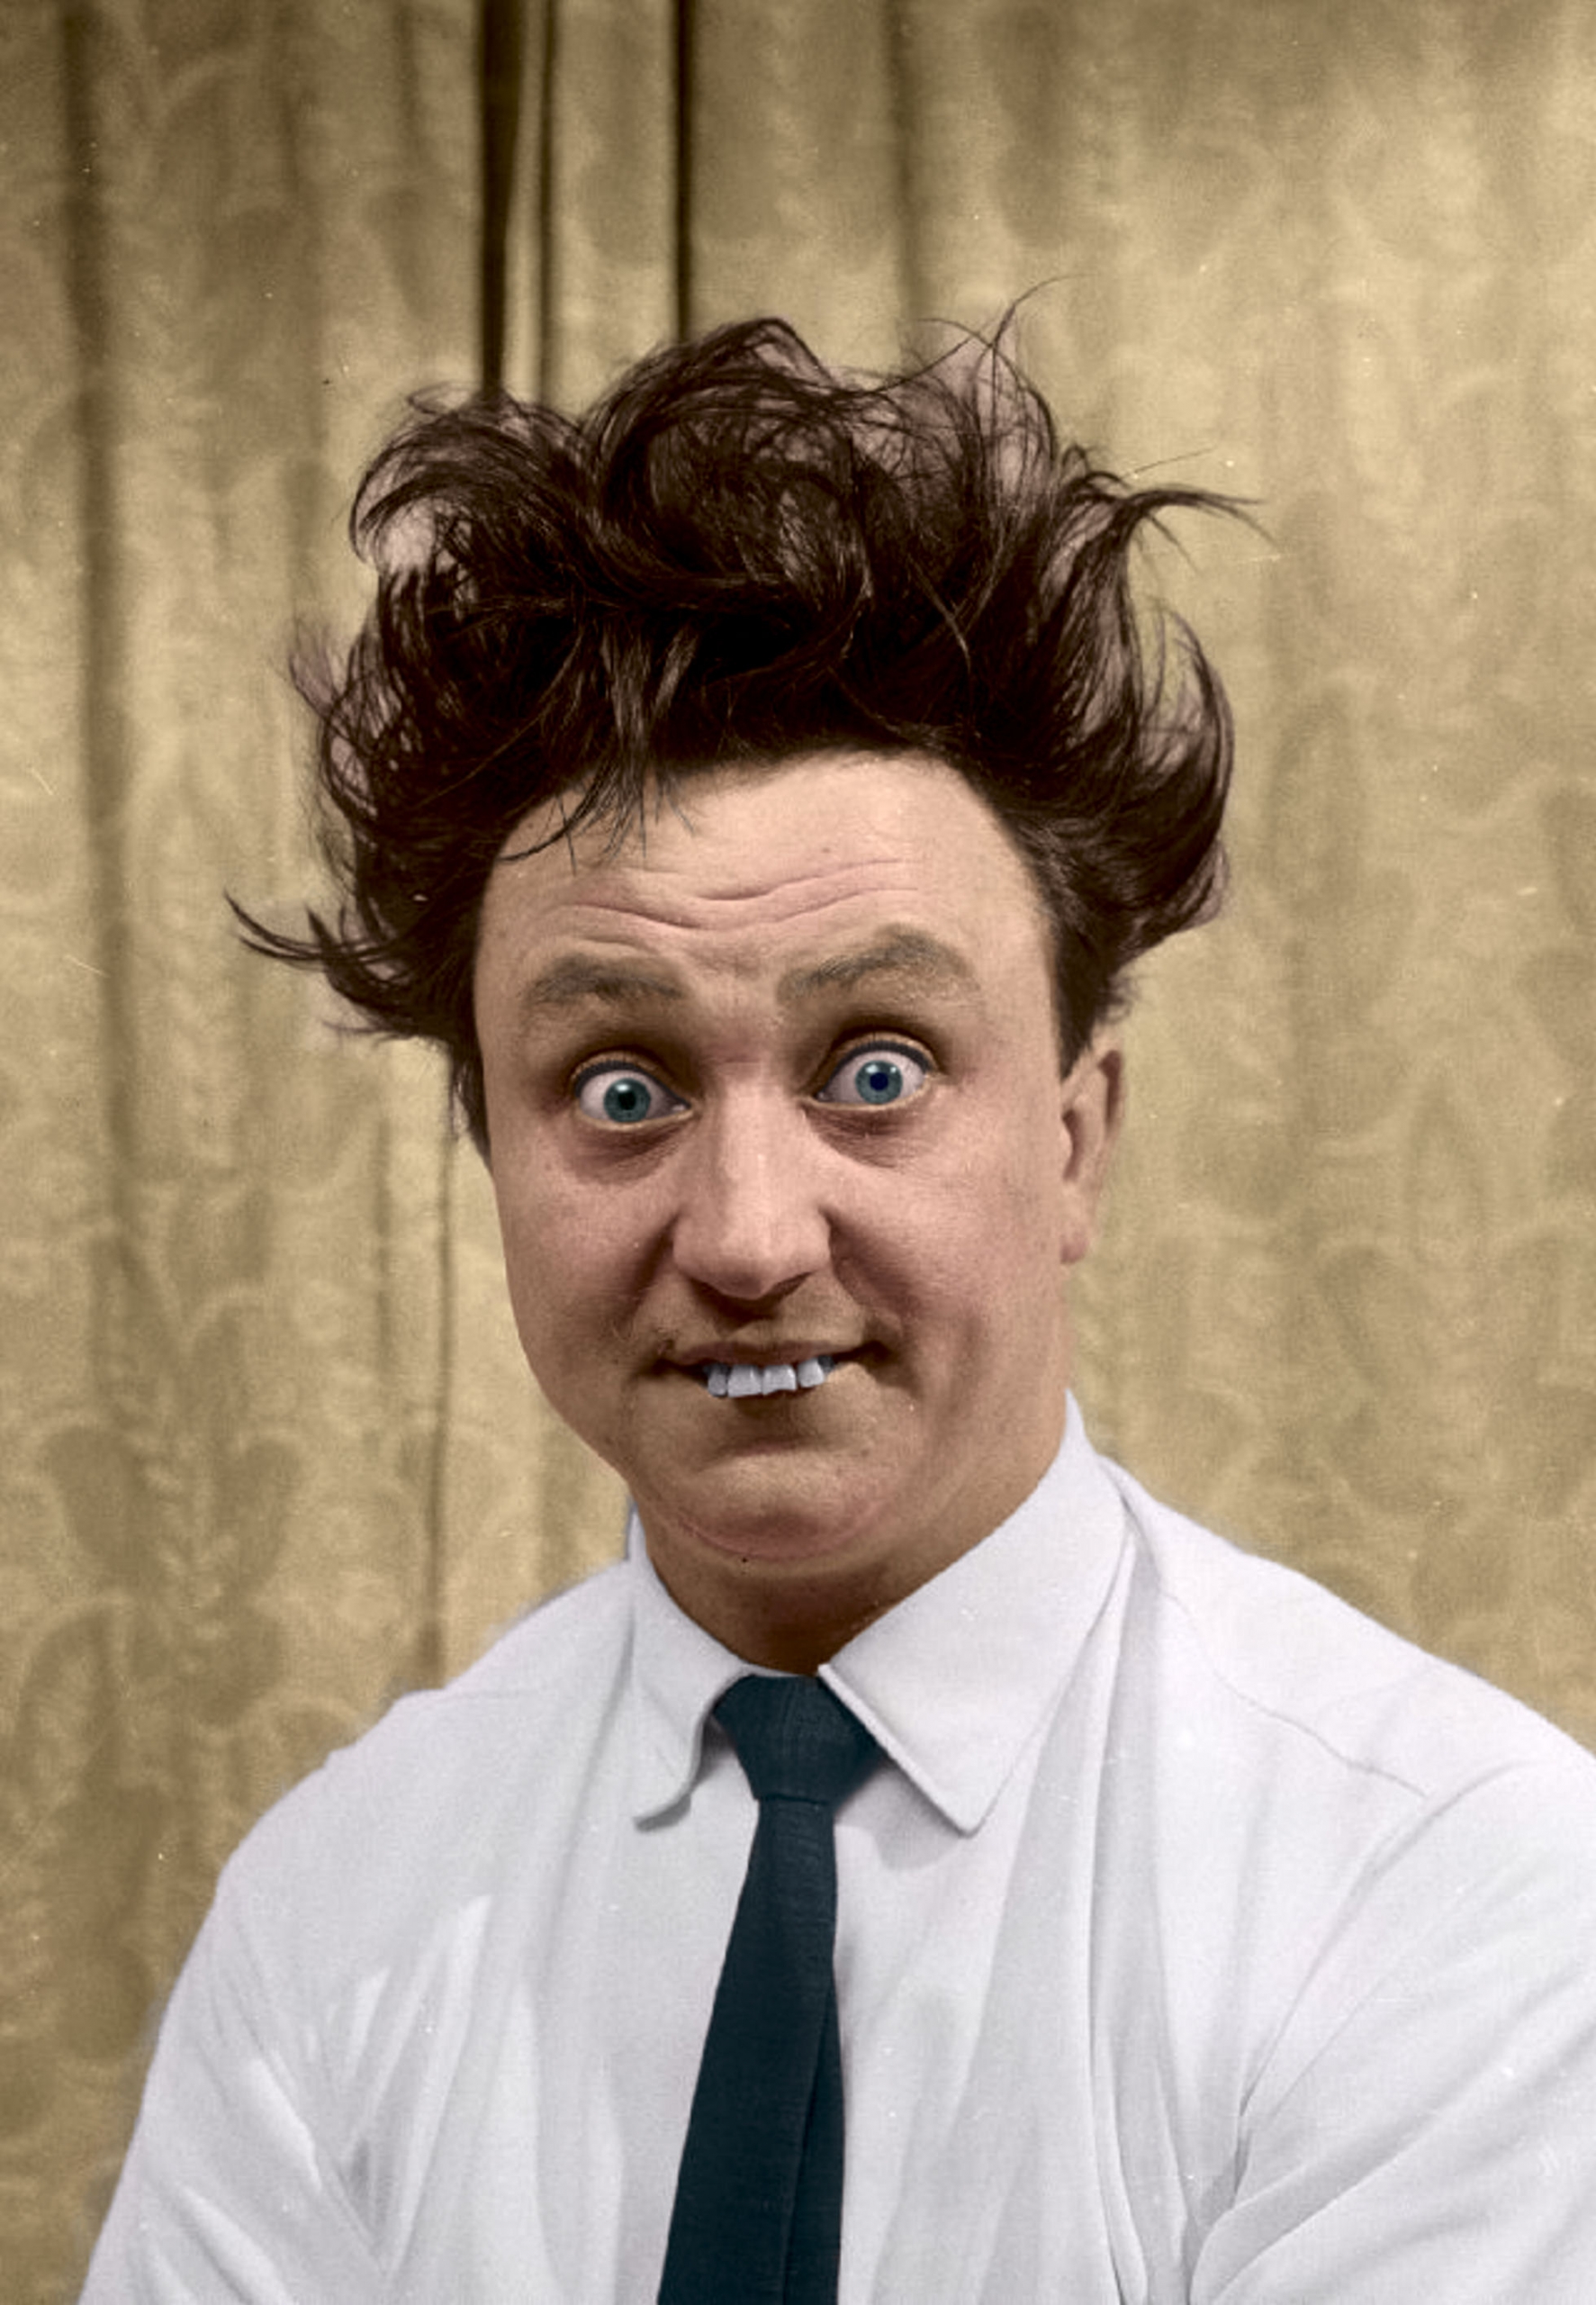 Ken Dodd young - The Chap